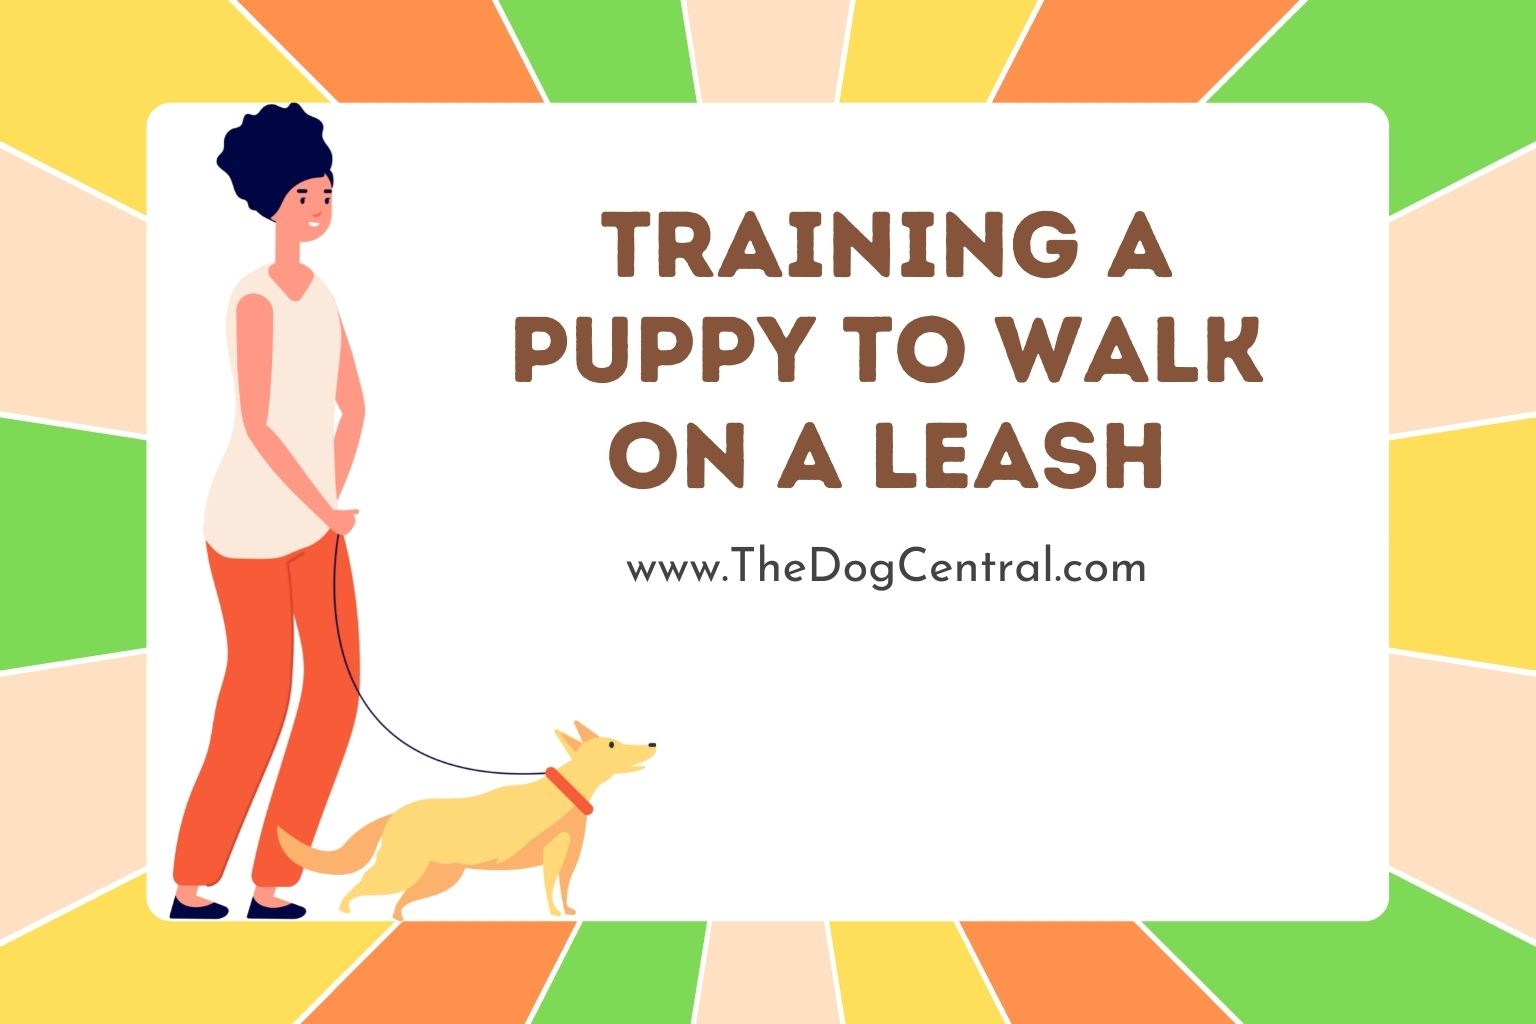 How to Train a Puppy to Walk on a Leash